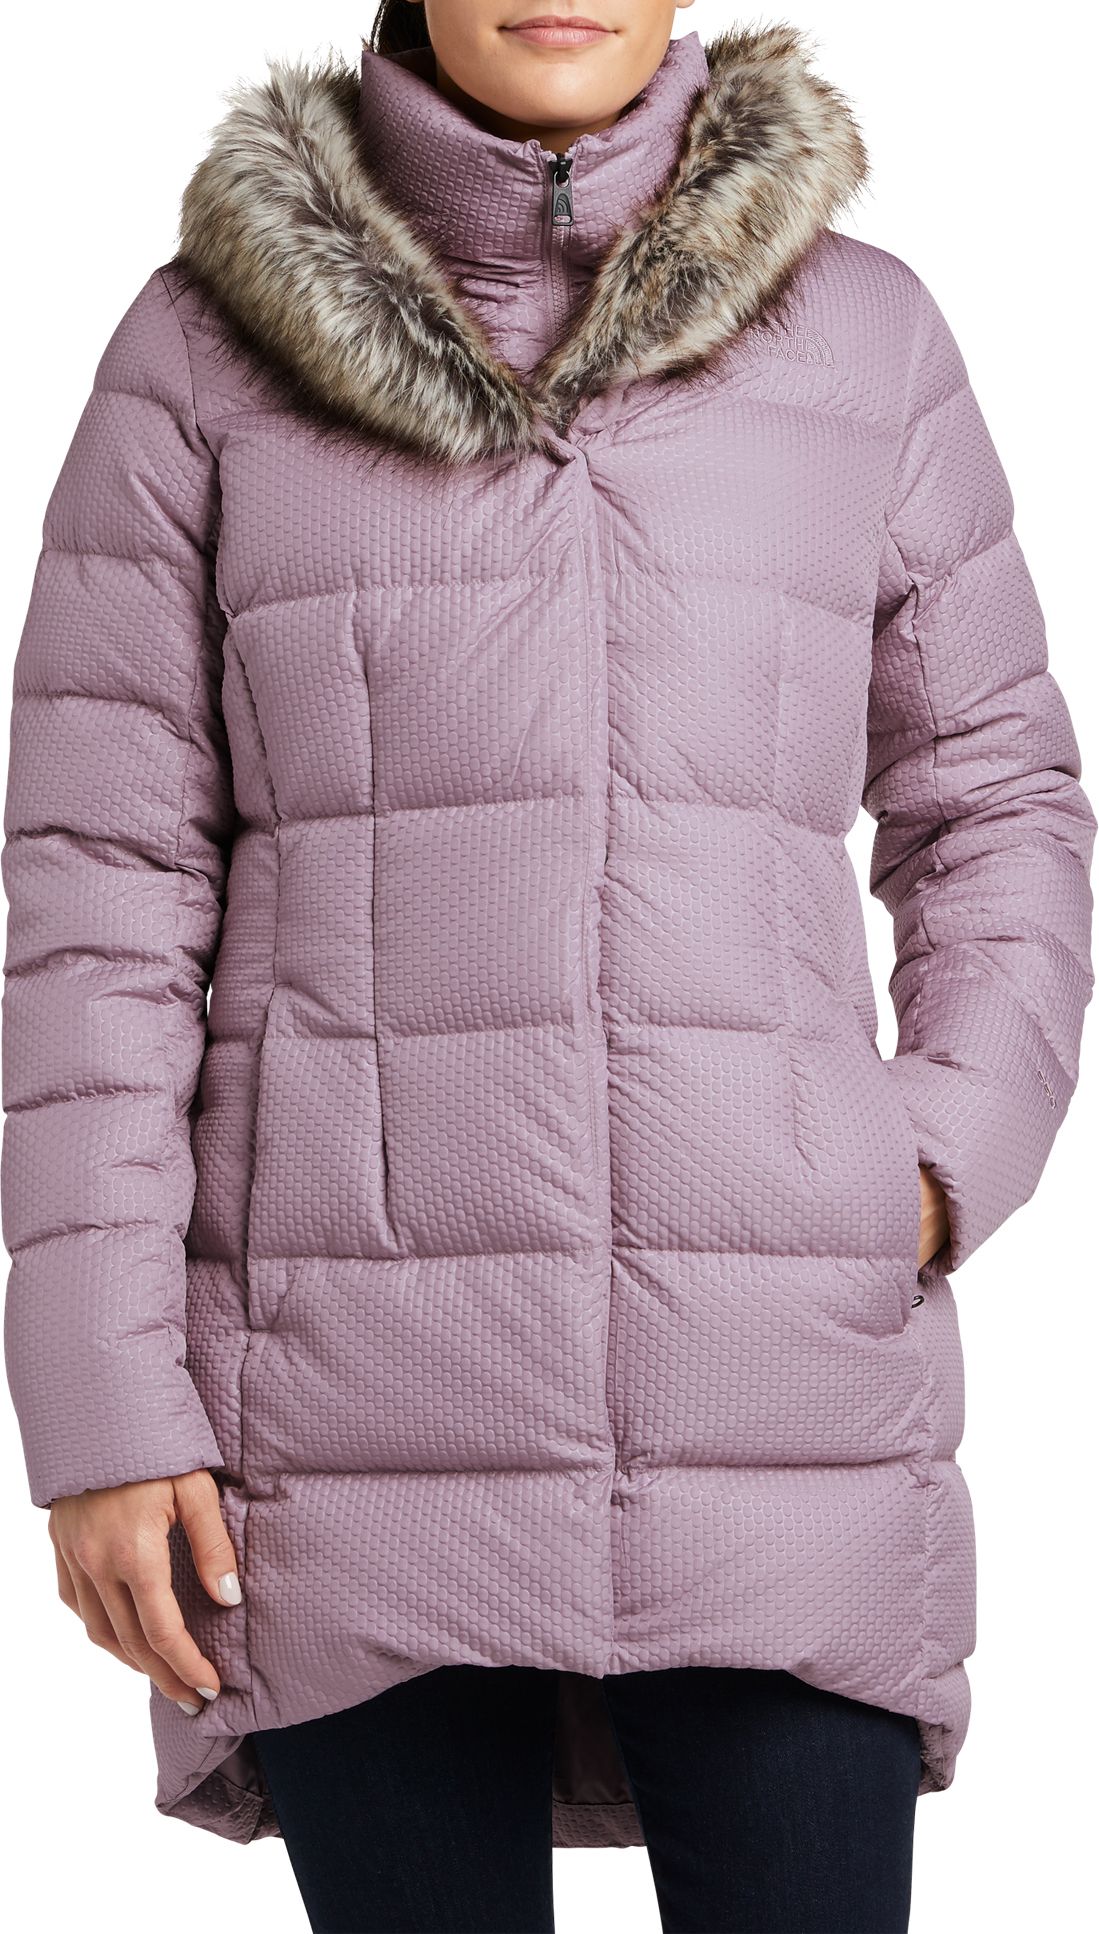 north face womens down jacket with fur hood